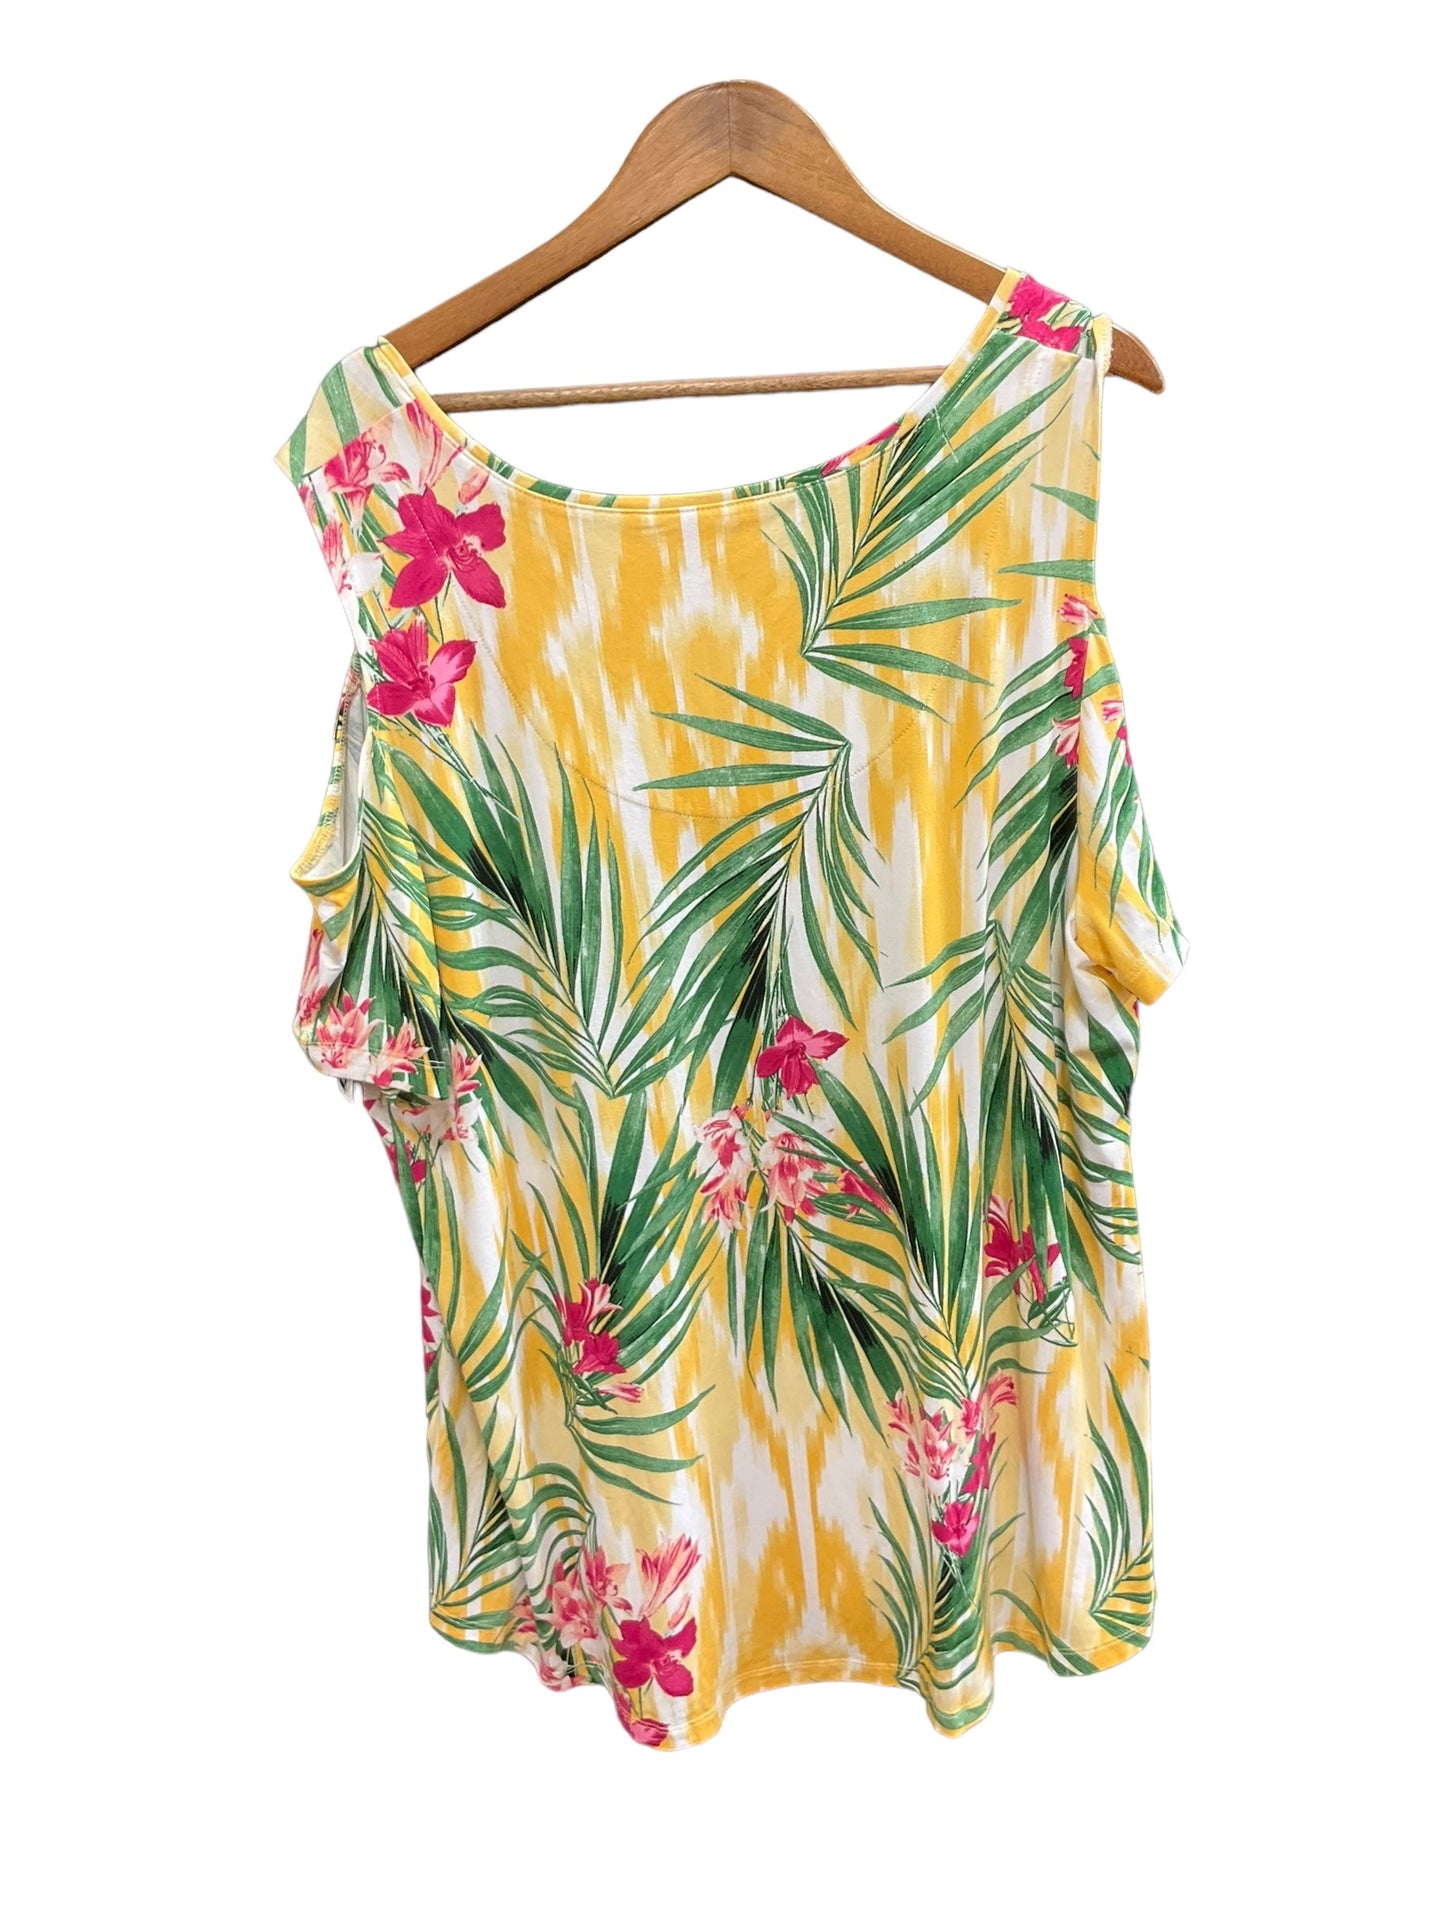 Tropical Print Top Short Sleeve Jm Collections, Size 3x